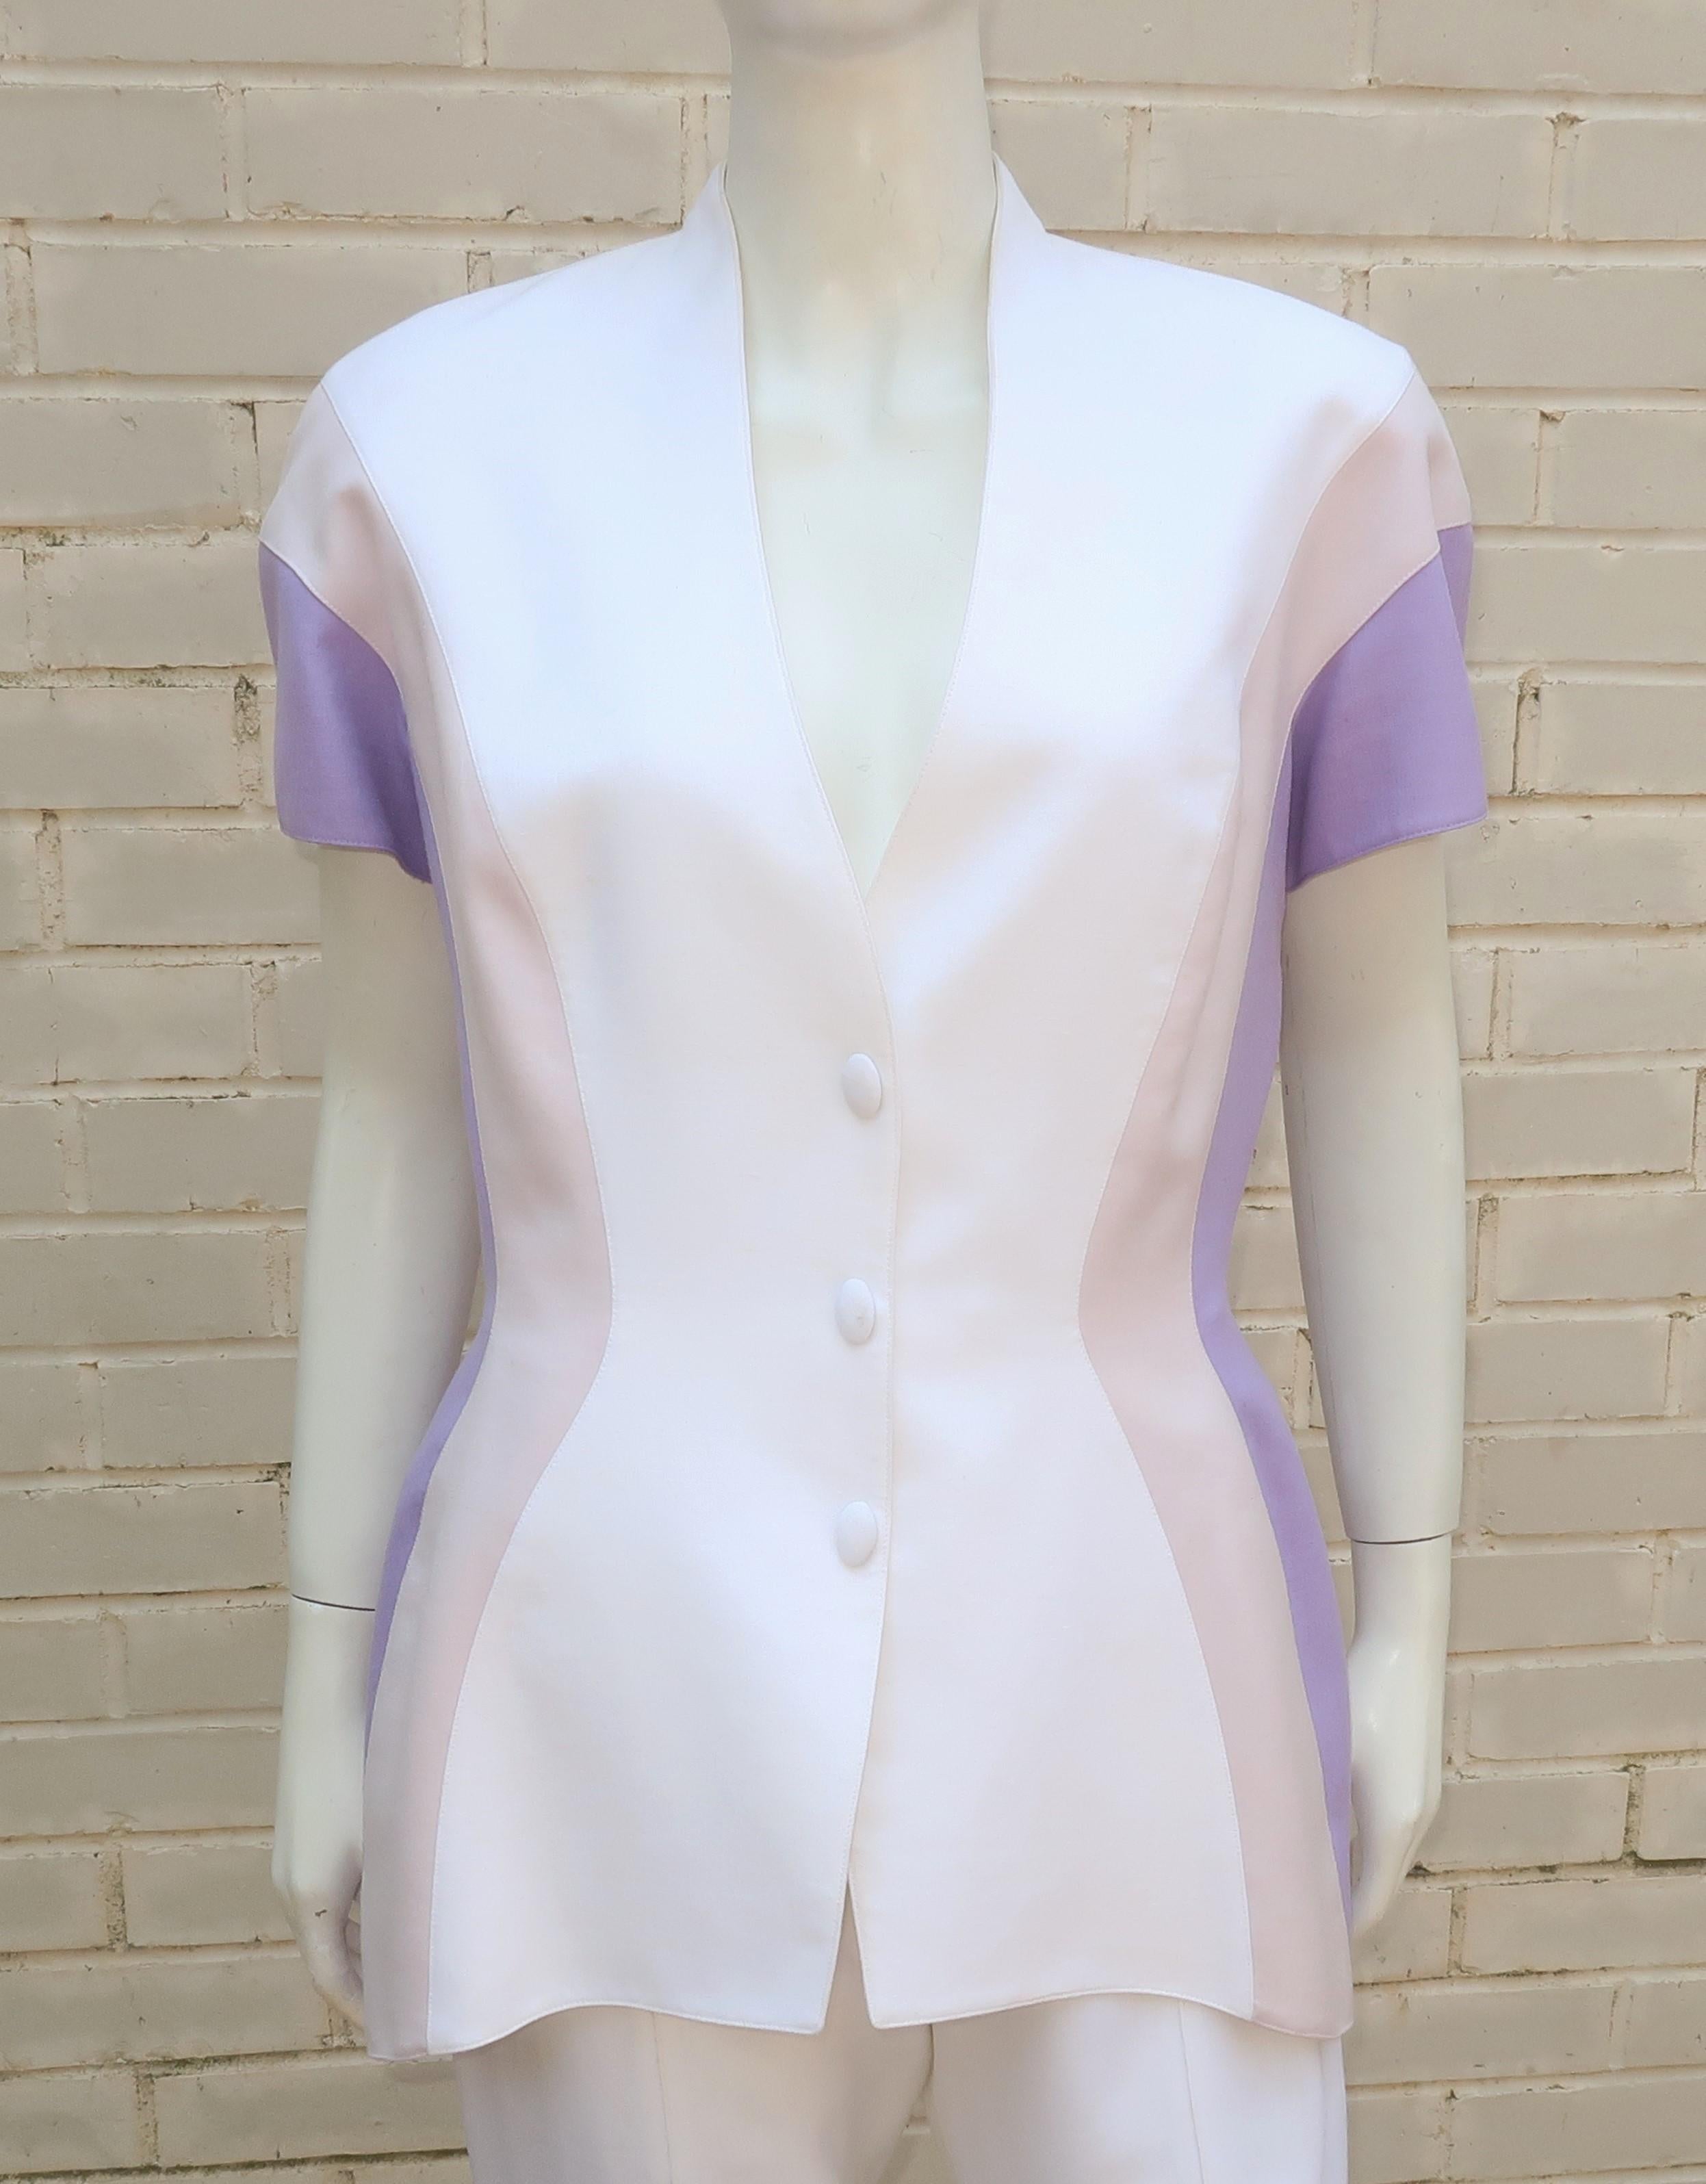 As with many of Thierry Mugler's designs, this 1980's linen suit is an inspired combination of a futuristic style with a nod to the strong silhouettes of the 1940's.  The short sleeved jacket has an elongated wasp waist shape with soft shoulder